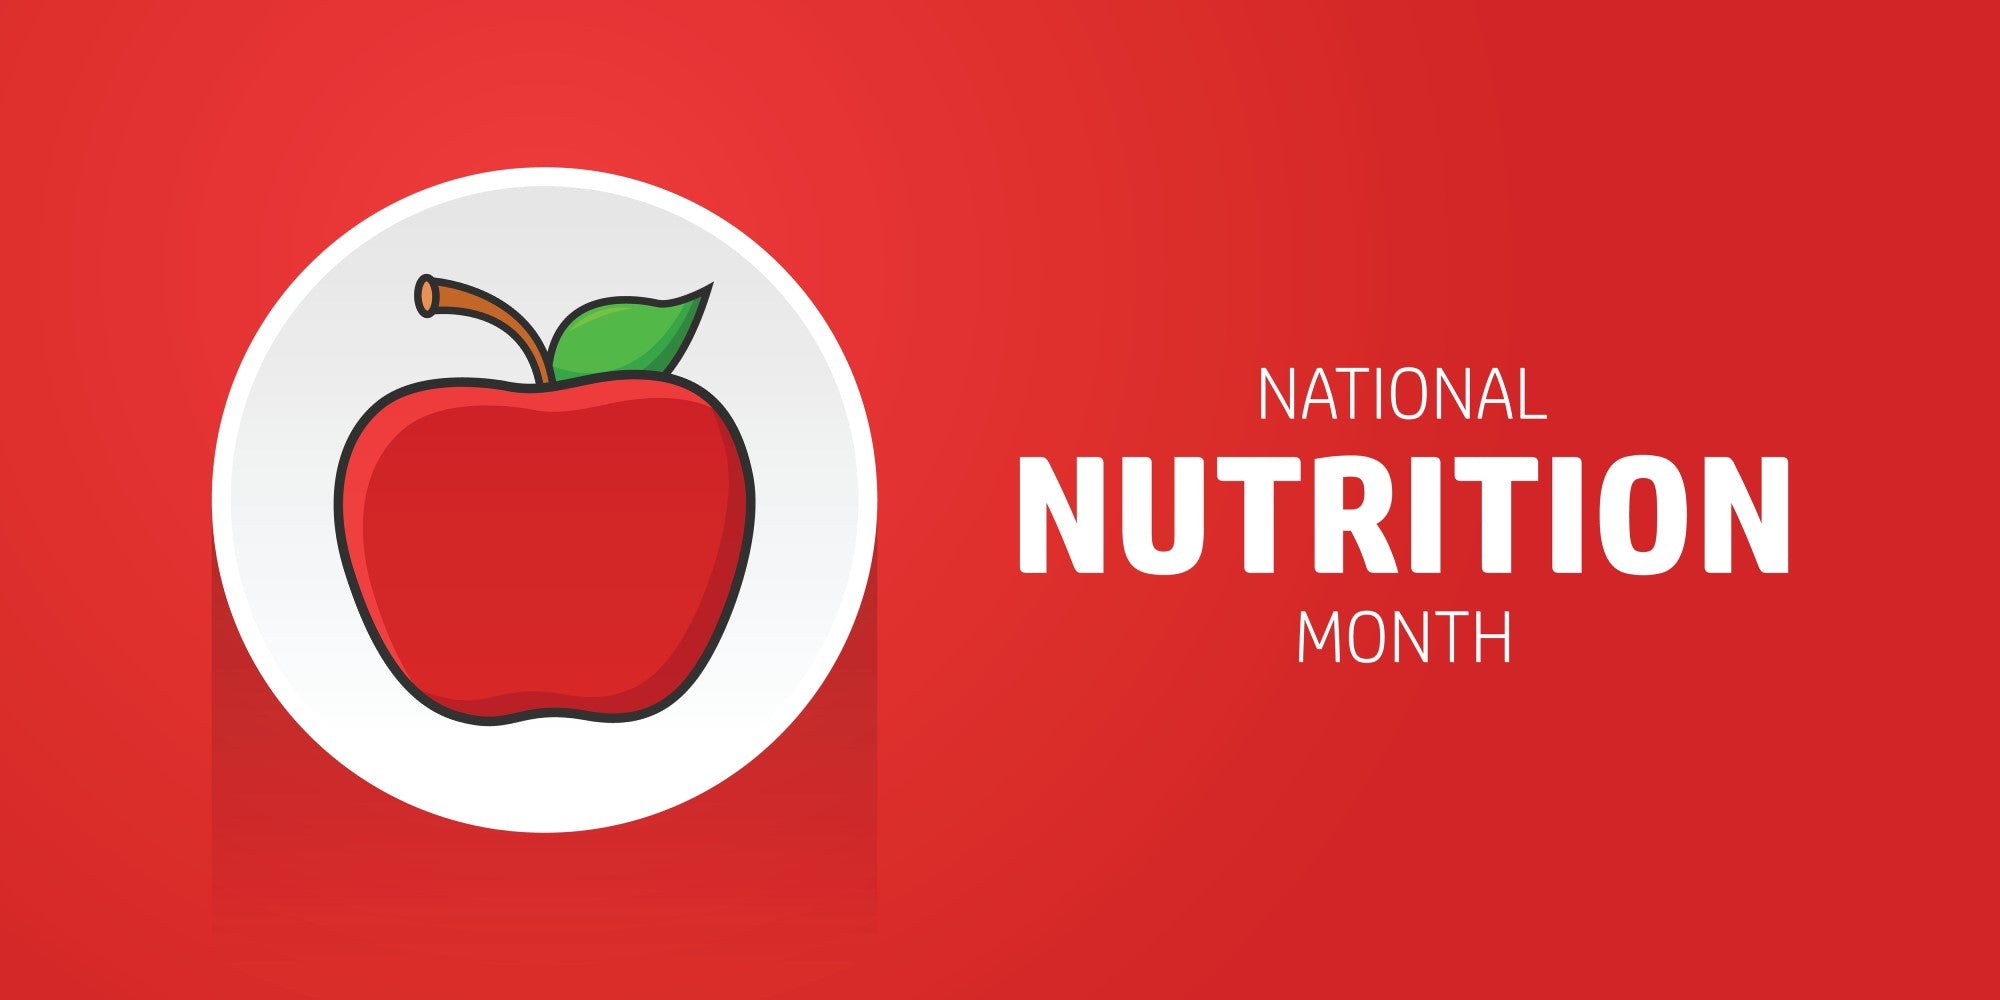 Manage Your Cholesterol for National Nutrition Month